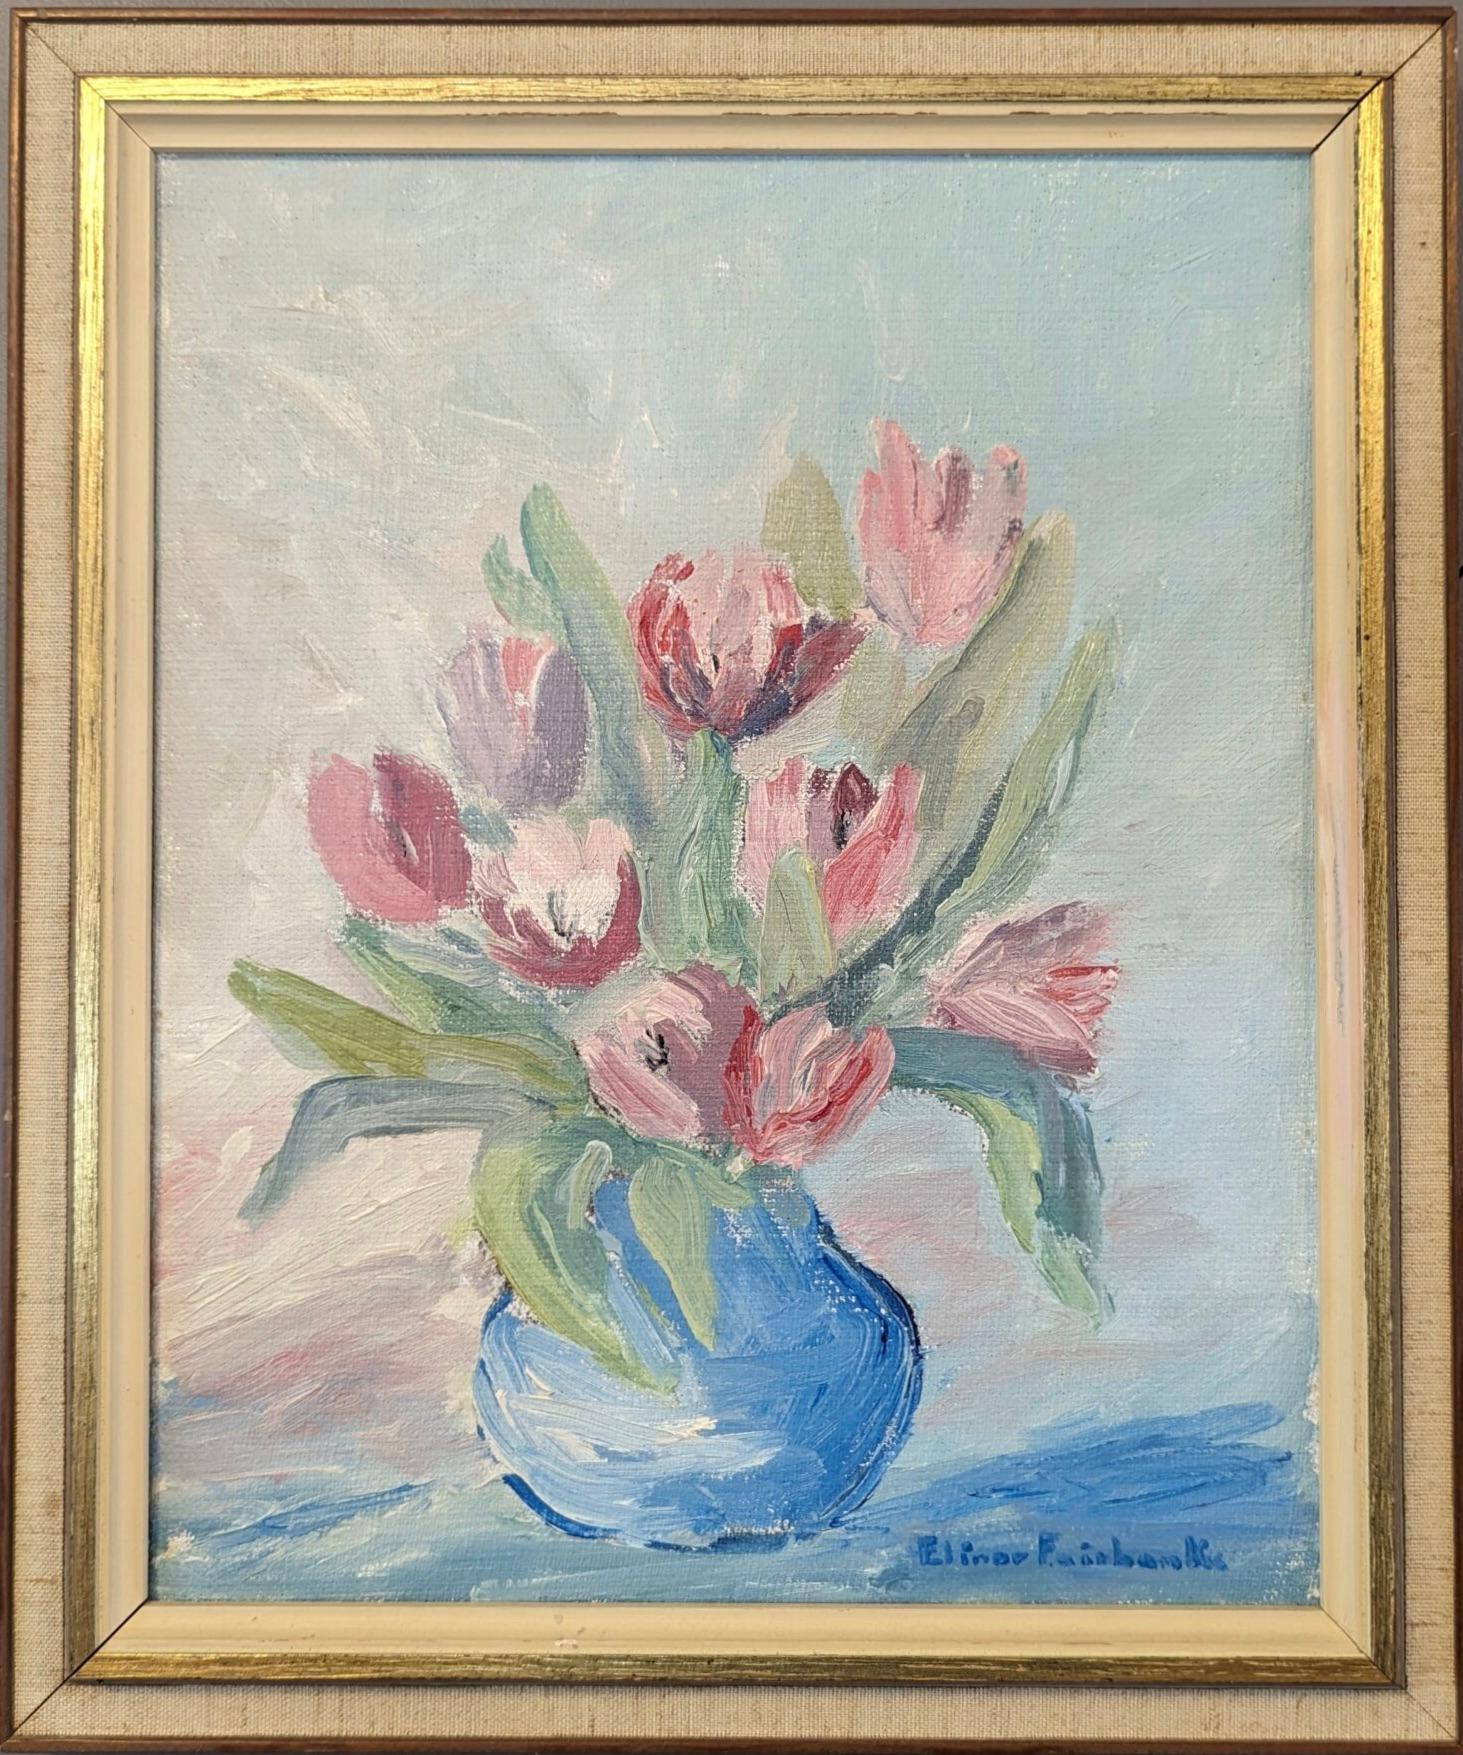 Unknown Still-Life Painting - Vintage Mid-Century Modern Floral Still Life Oil Painting - Tulips in Pastel